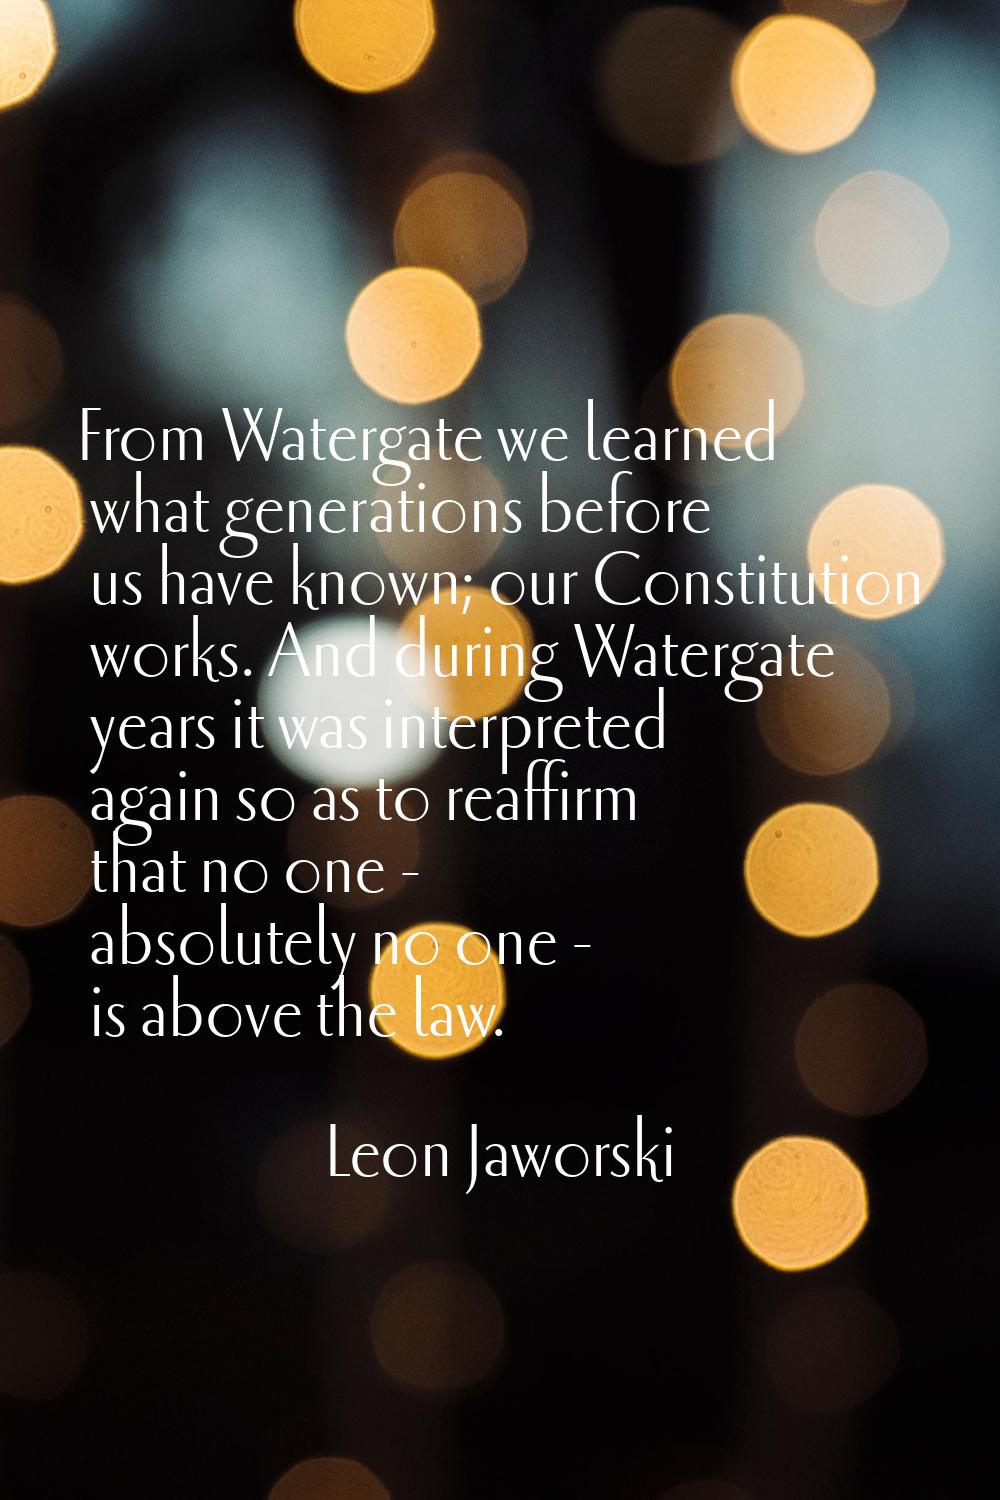 From Watergate we learned what generations before us have known; our Constitution works. And during